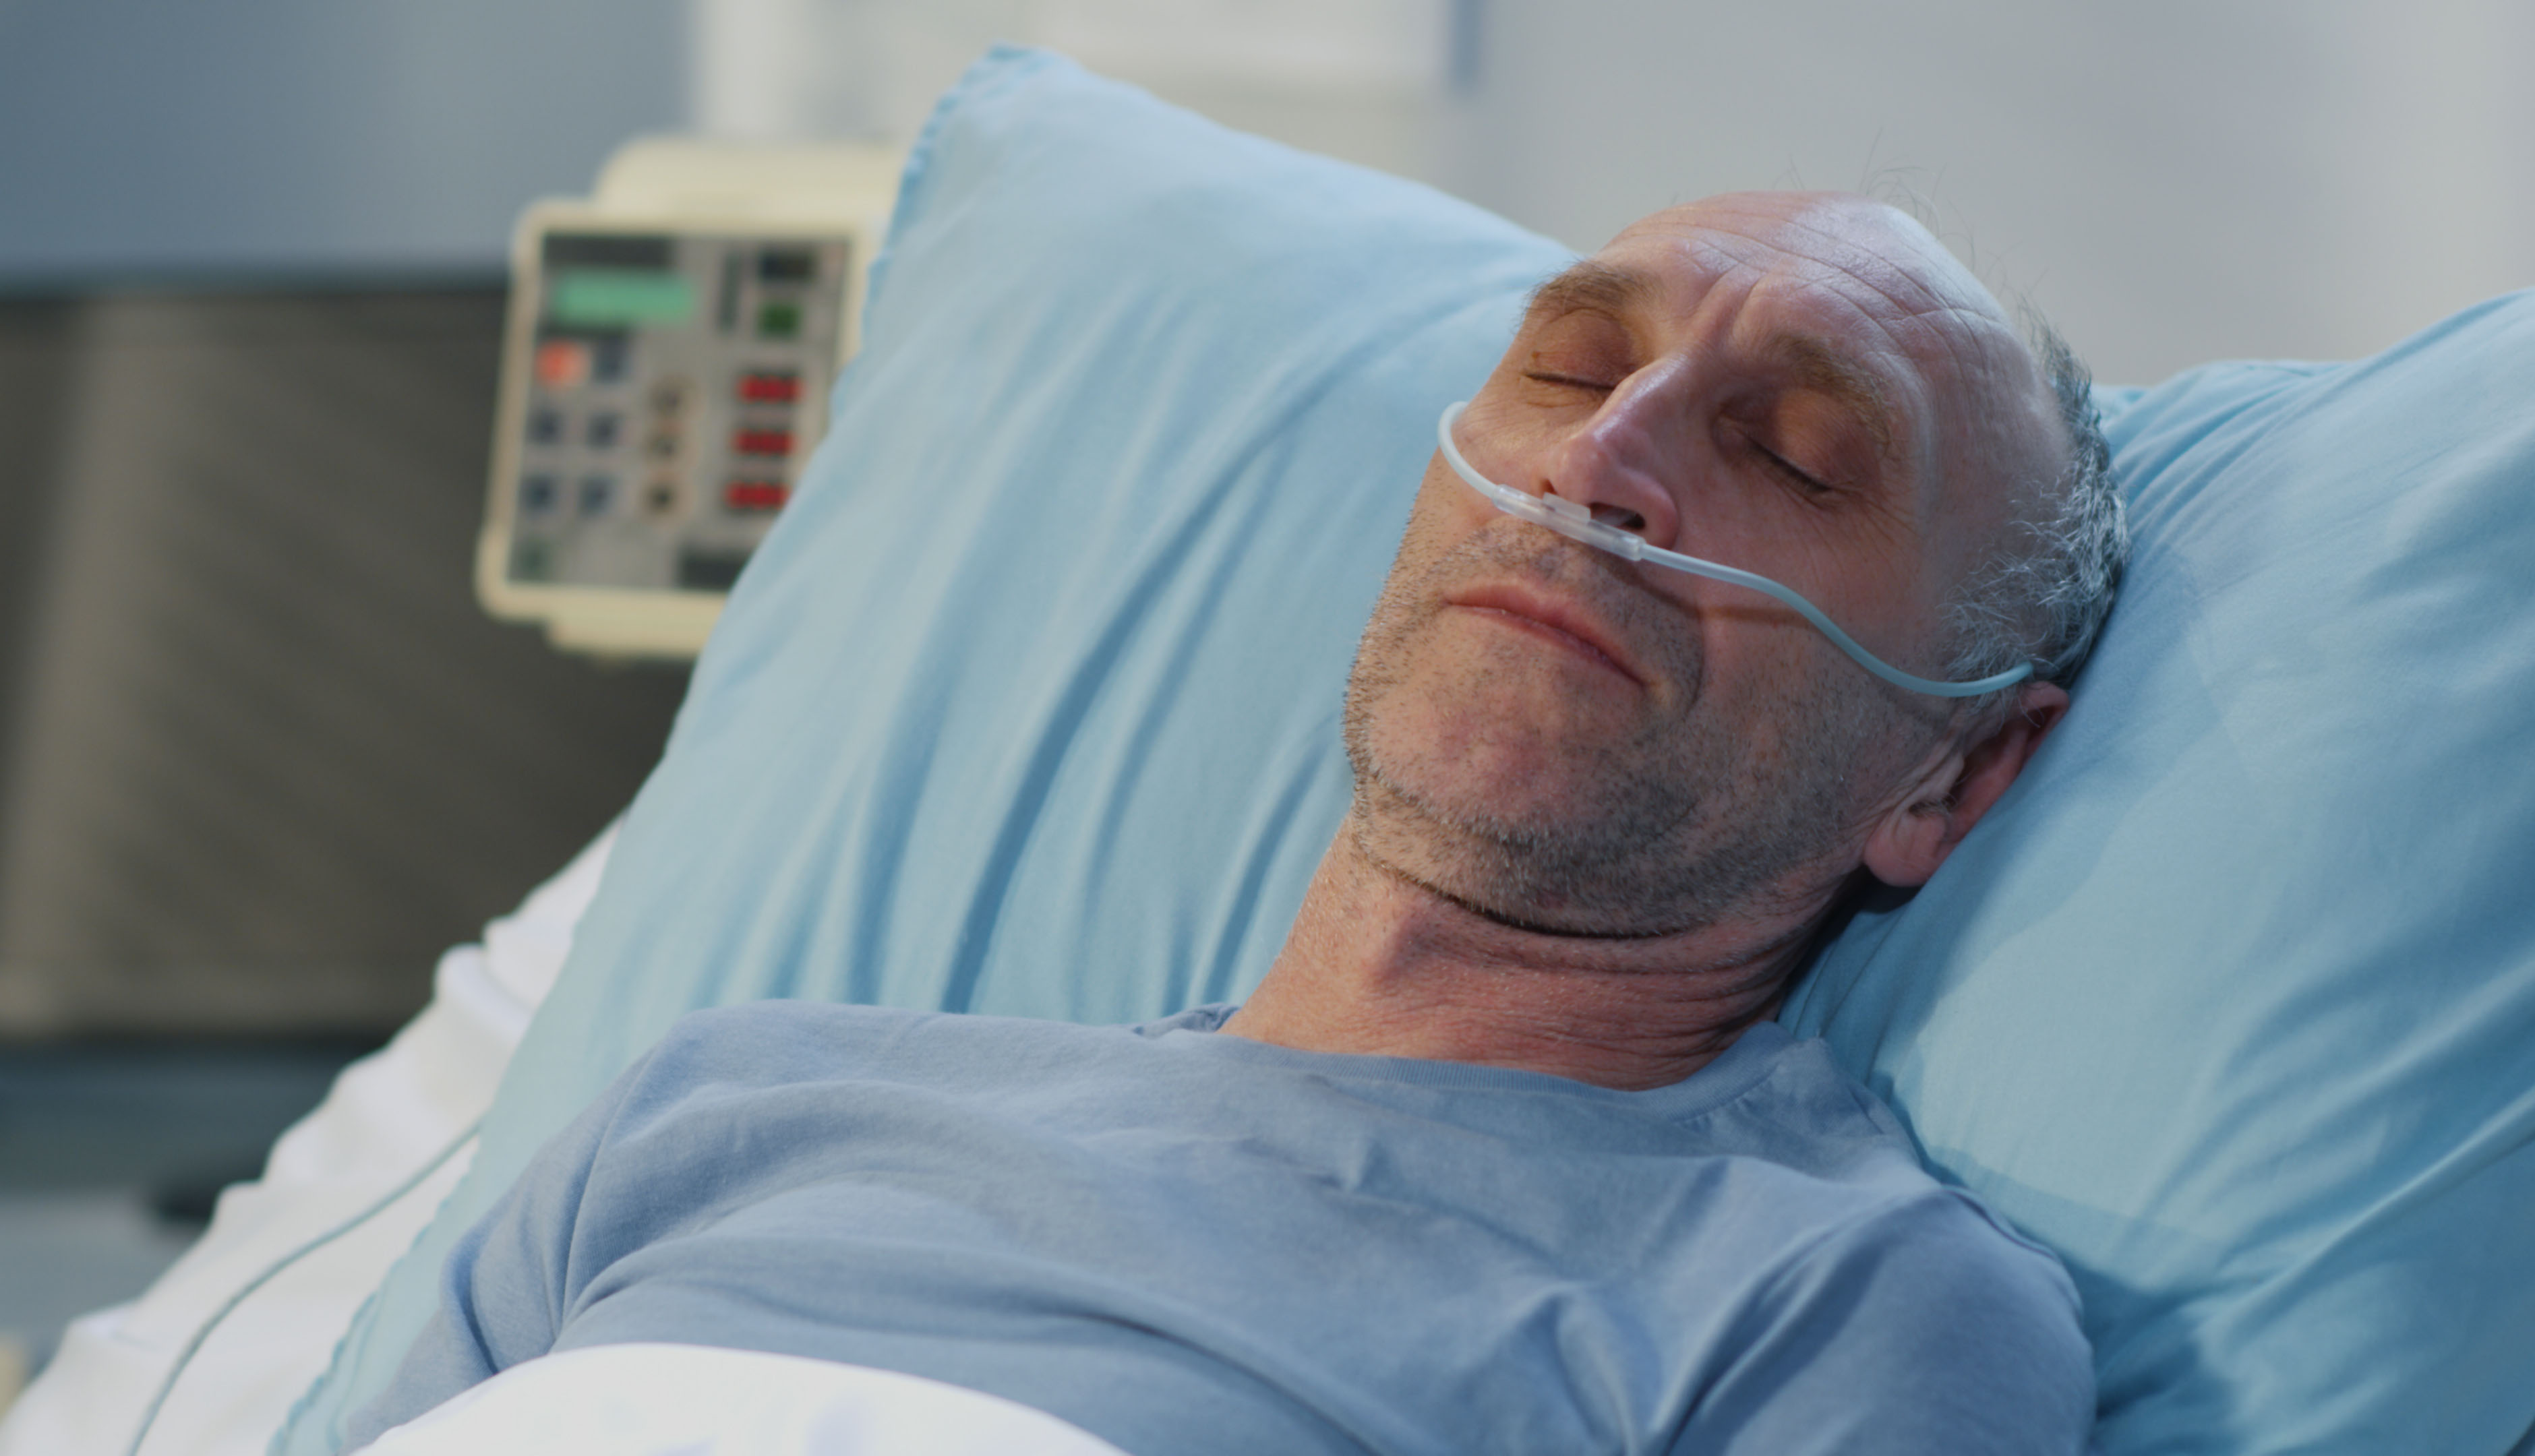 close up of male patient lying in hospital with a nasal canula in his nose to help with oxygen